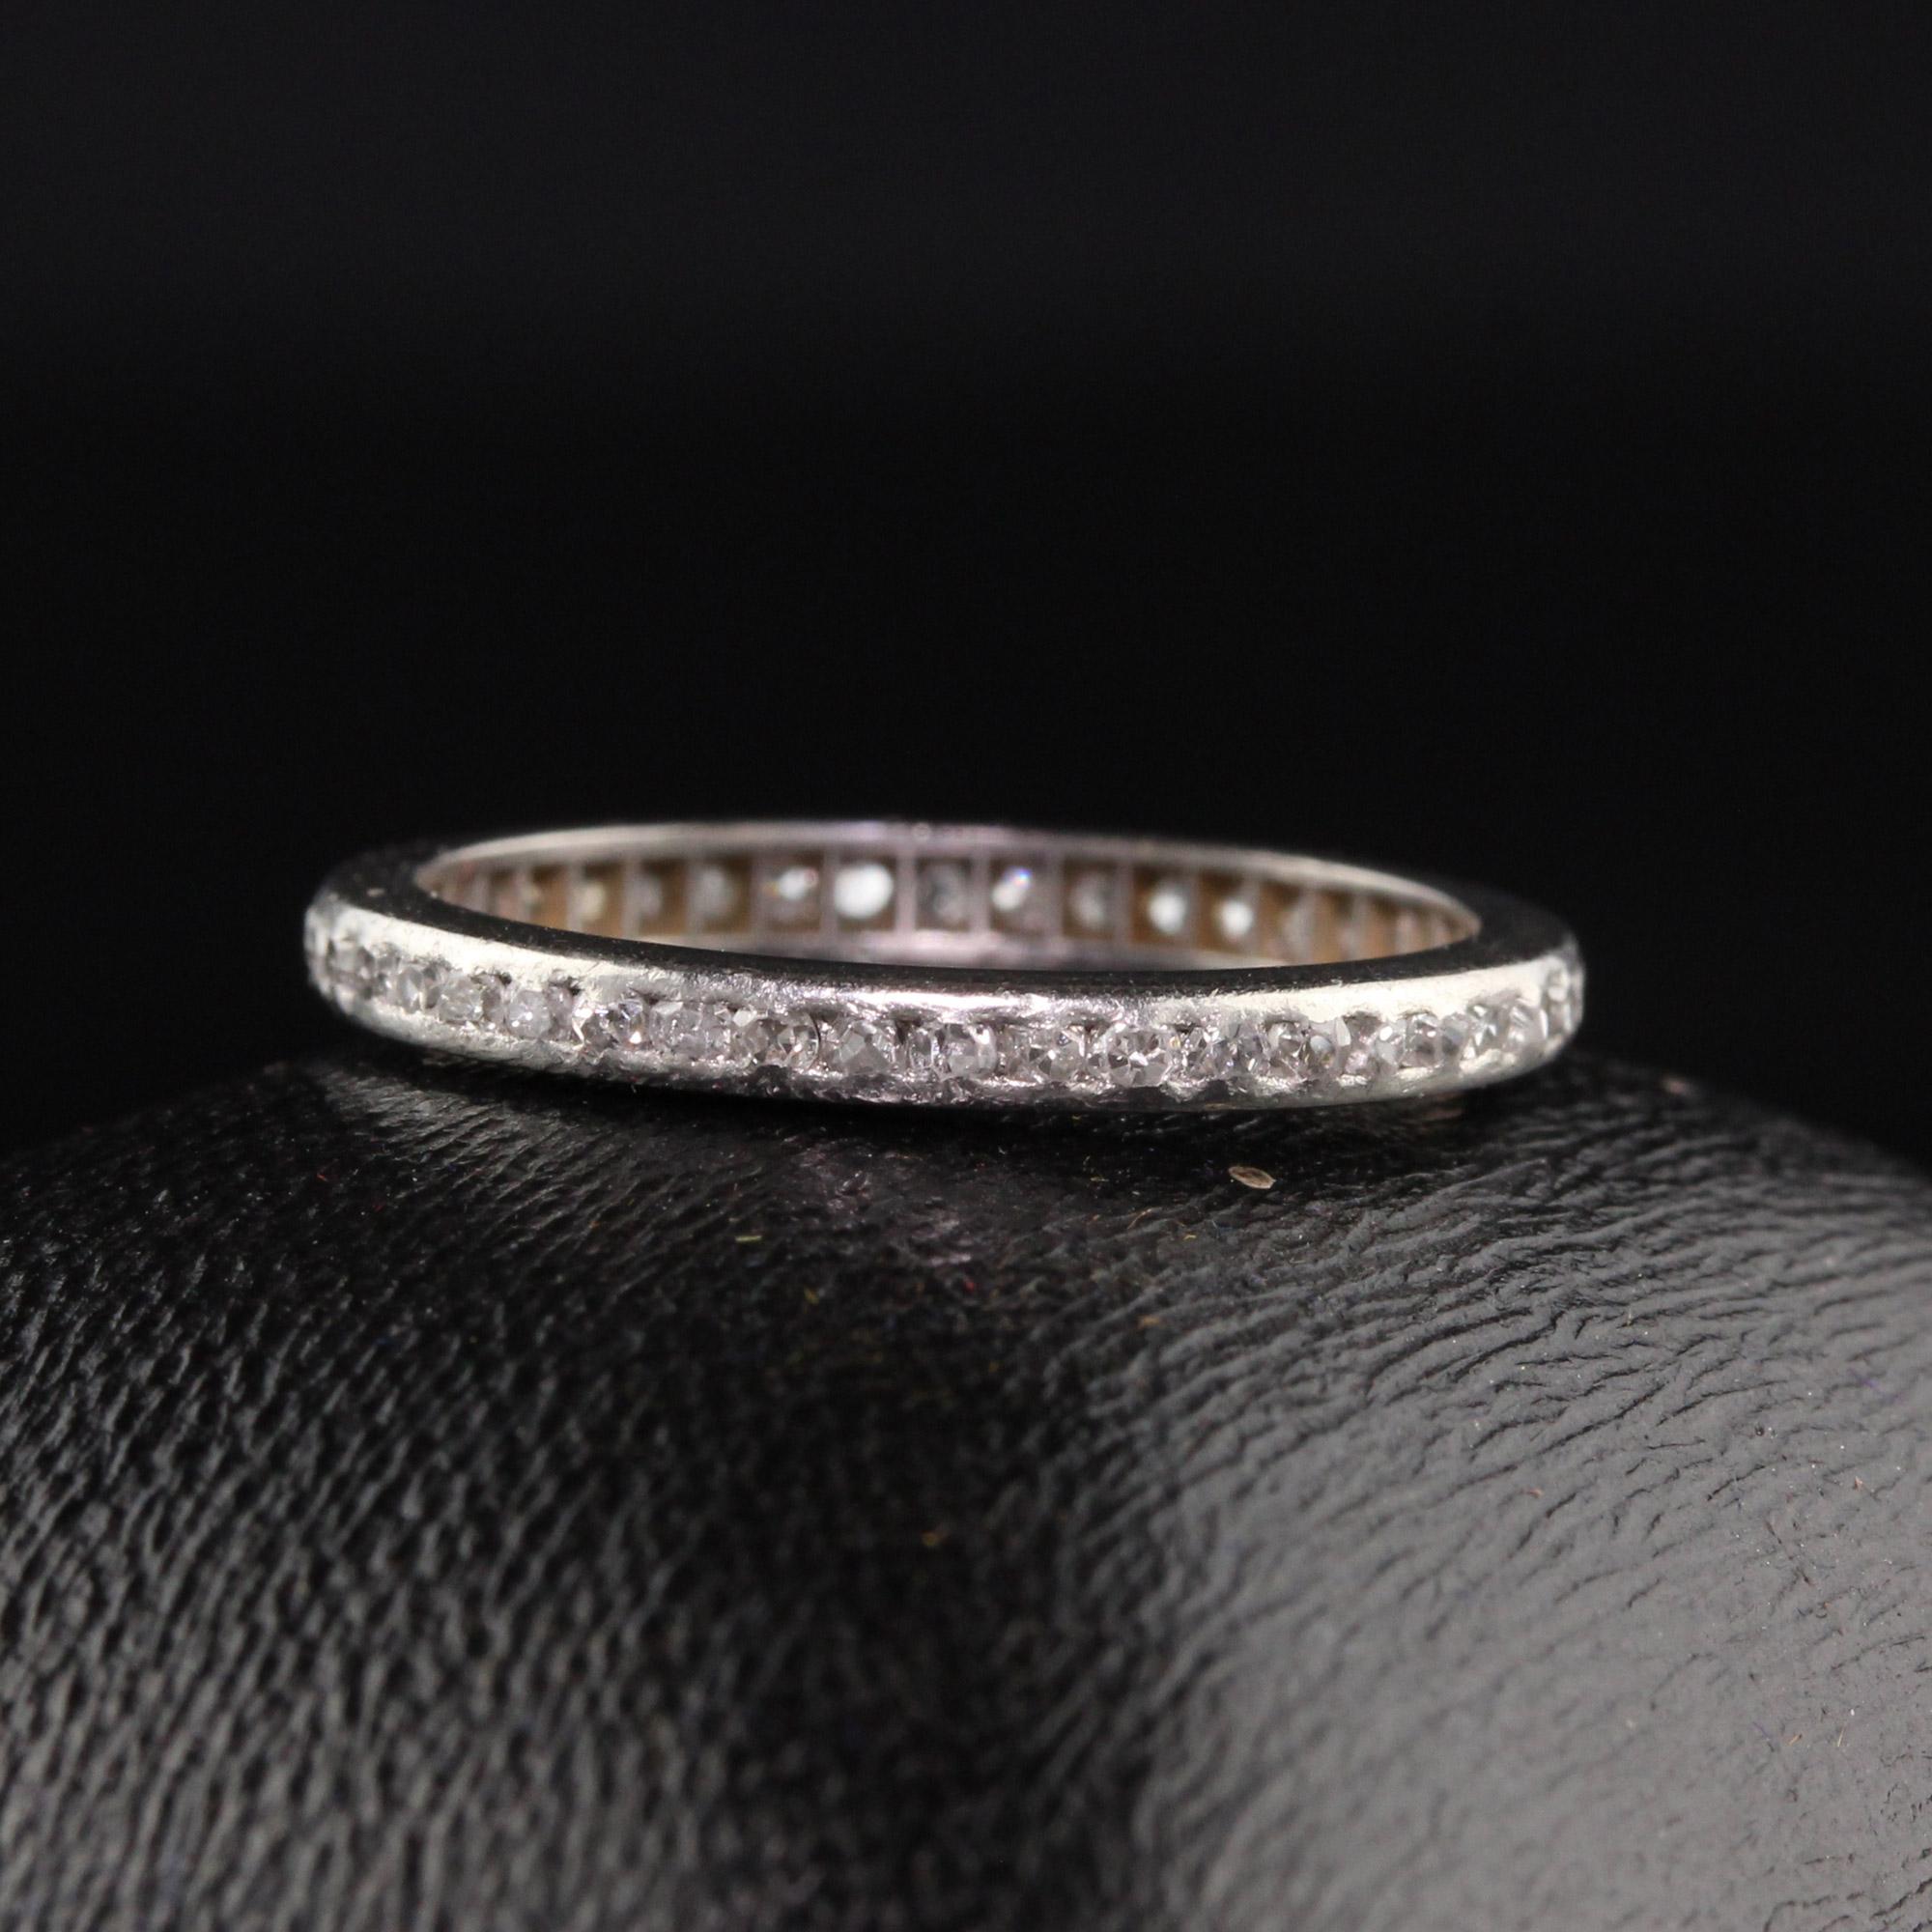 Beautiful Antique Art Deco Platinum Single Cut Diamond Eternity Band. This classic eternity band has single cut diamonds set in an art deco platinum mounting and can be worn and stacked with almost anything.

Item #R1000

Metal: Platinum

Weight: